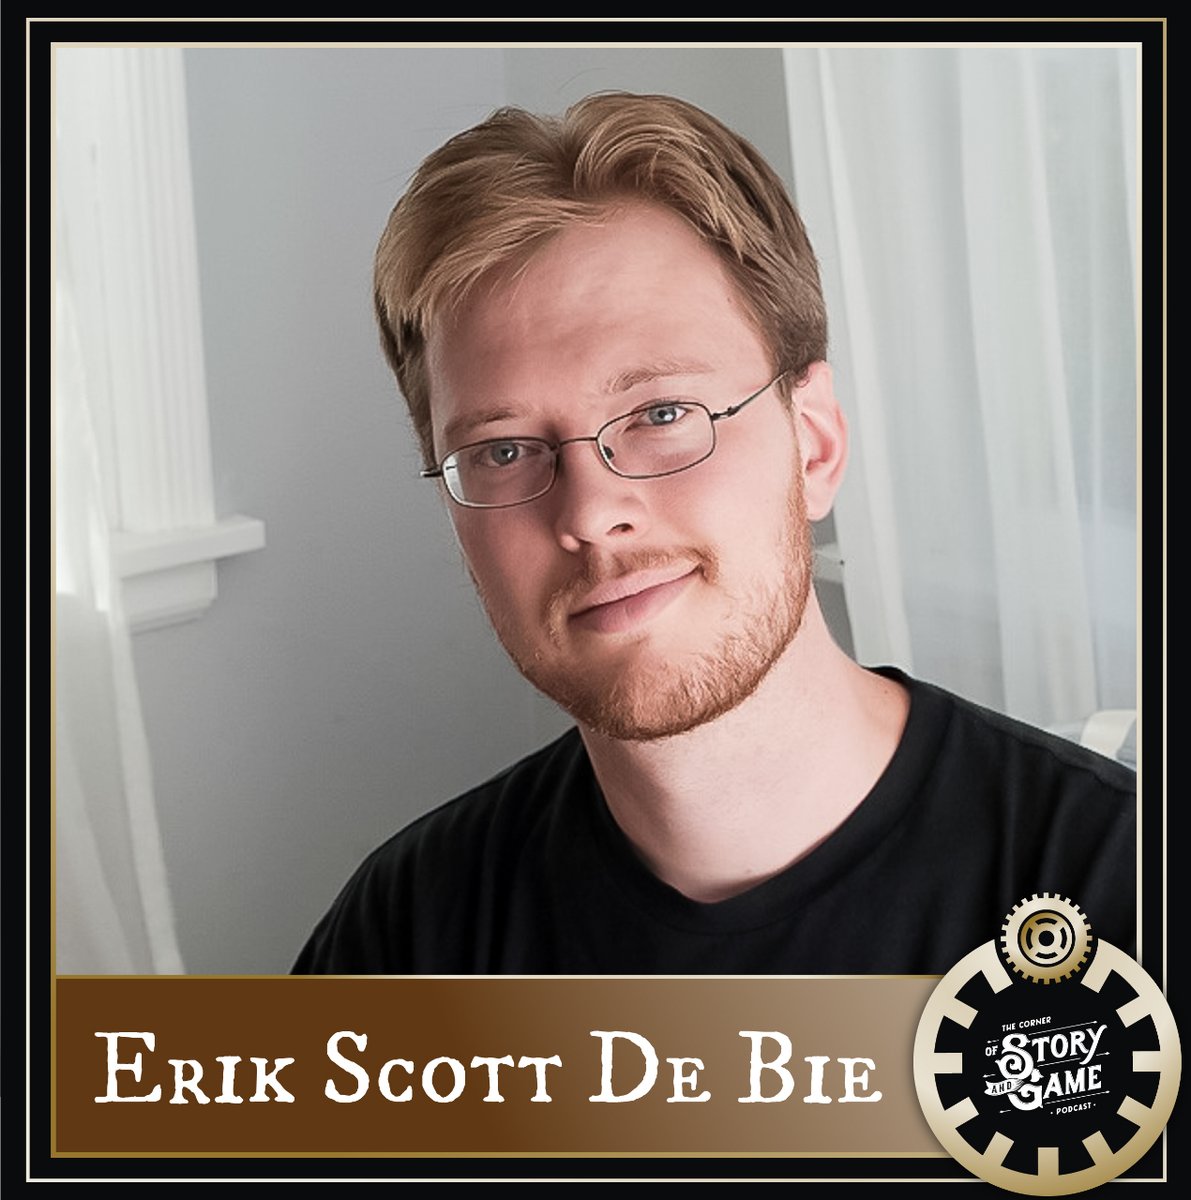 NEW EPISODE: 🎙️ bit.ly/4a74Zpw | 📽️ youtu.be/-BeF1idfS2g

Today, we return to the table with the illustrious @erikscottdebie, this time exploring the power and allure of short stories.

#ErikScottDeBie #ShortFiction #WritingAdvice #TheCornerOfStoryAndGame